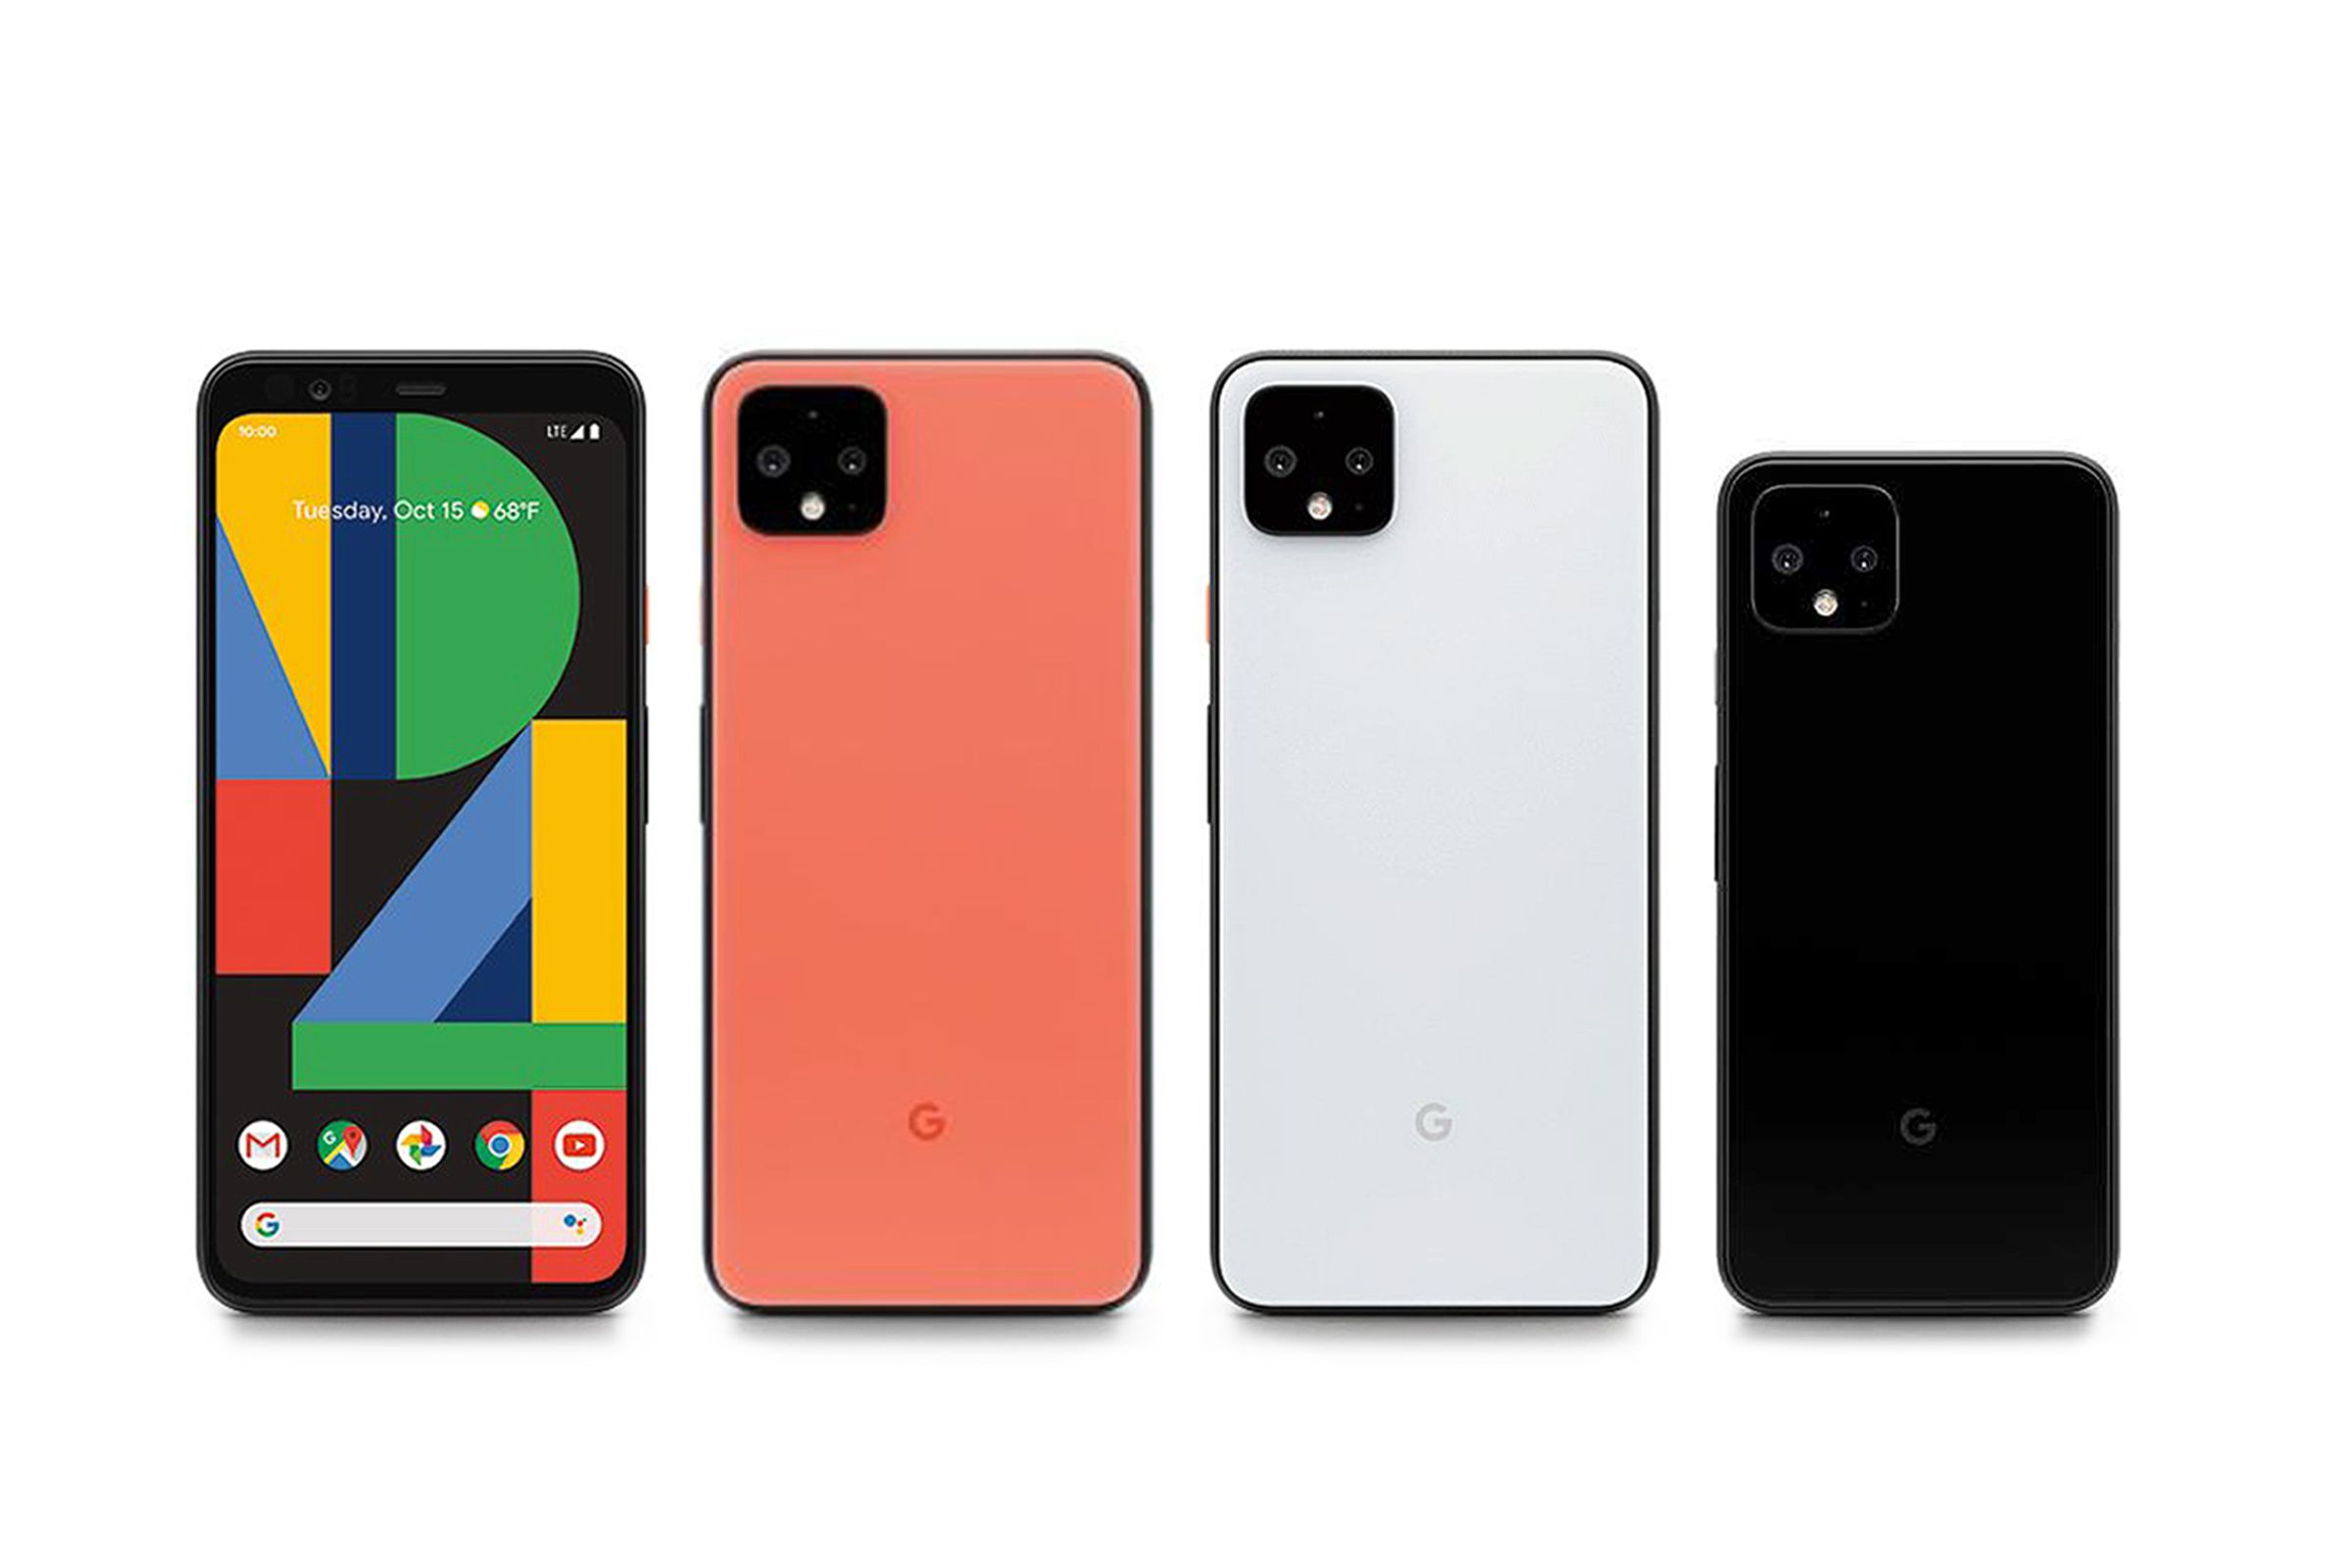 Leaked renders of the “oh so orange” and “clearly white” Pixel 4 XLs and the “just black” Pixel 4.